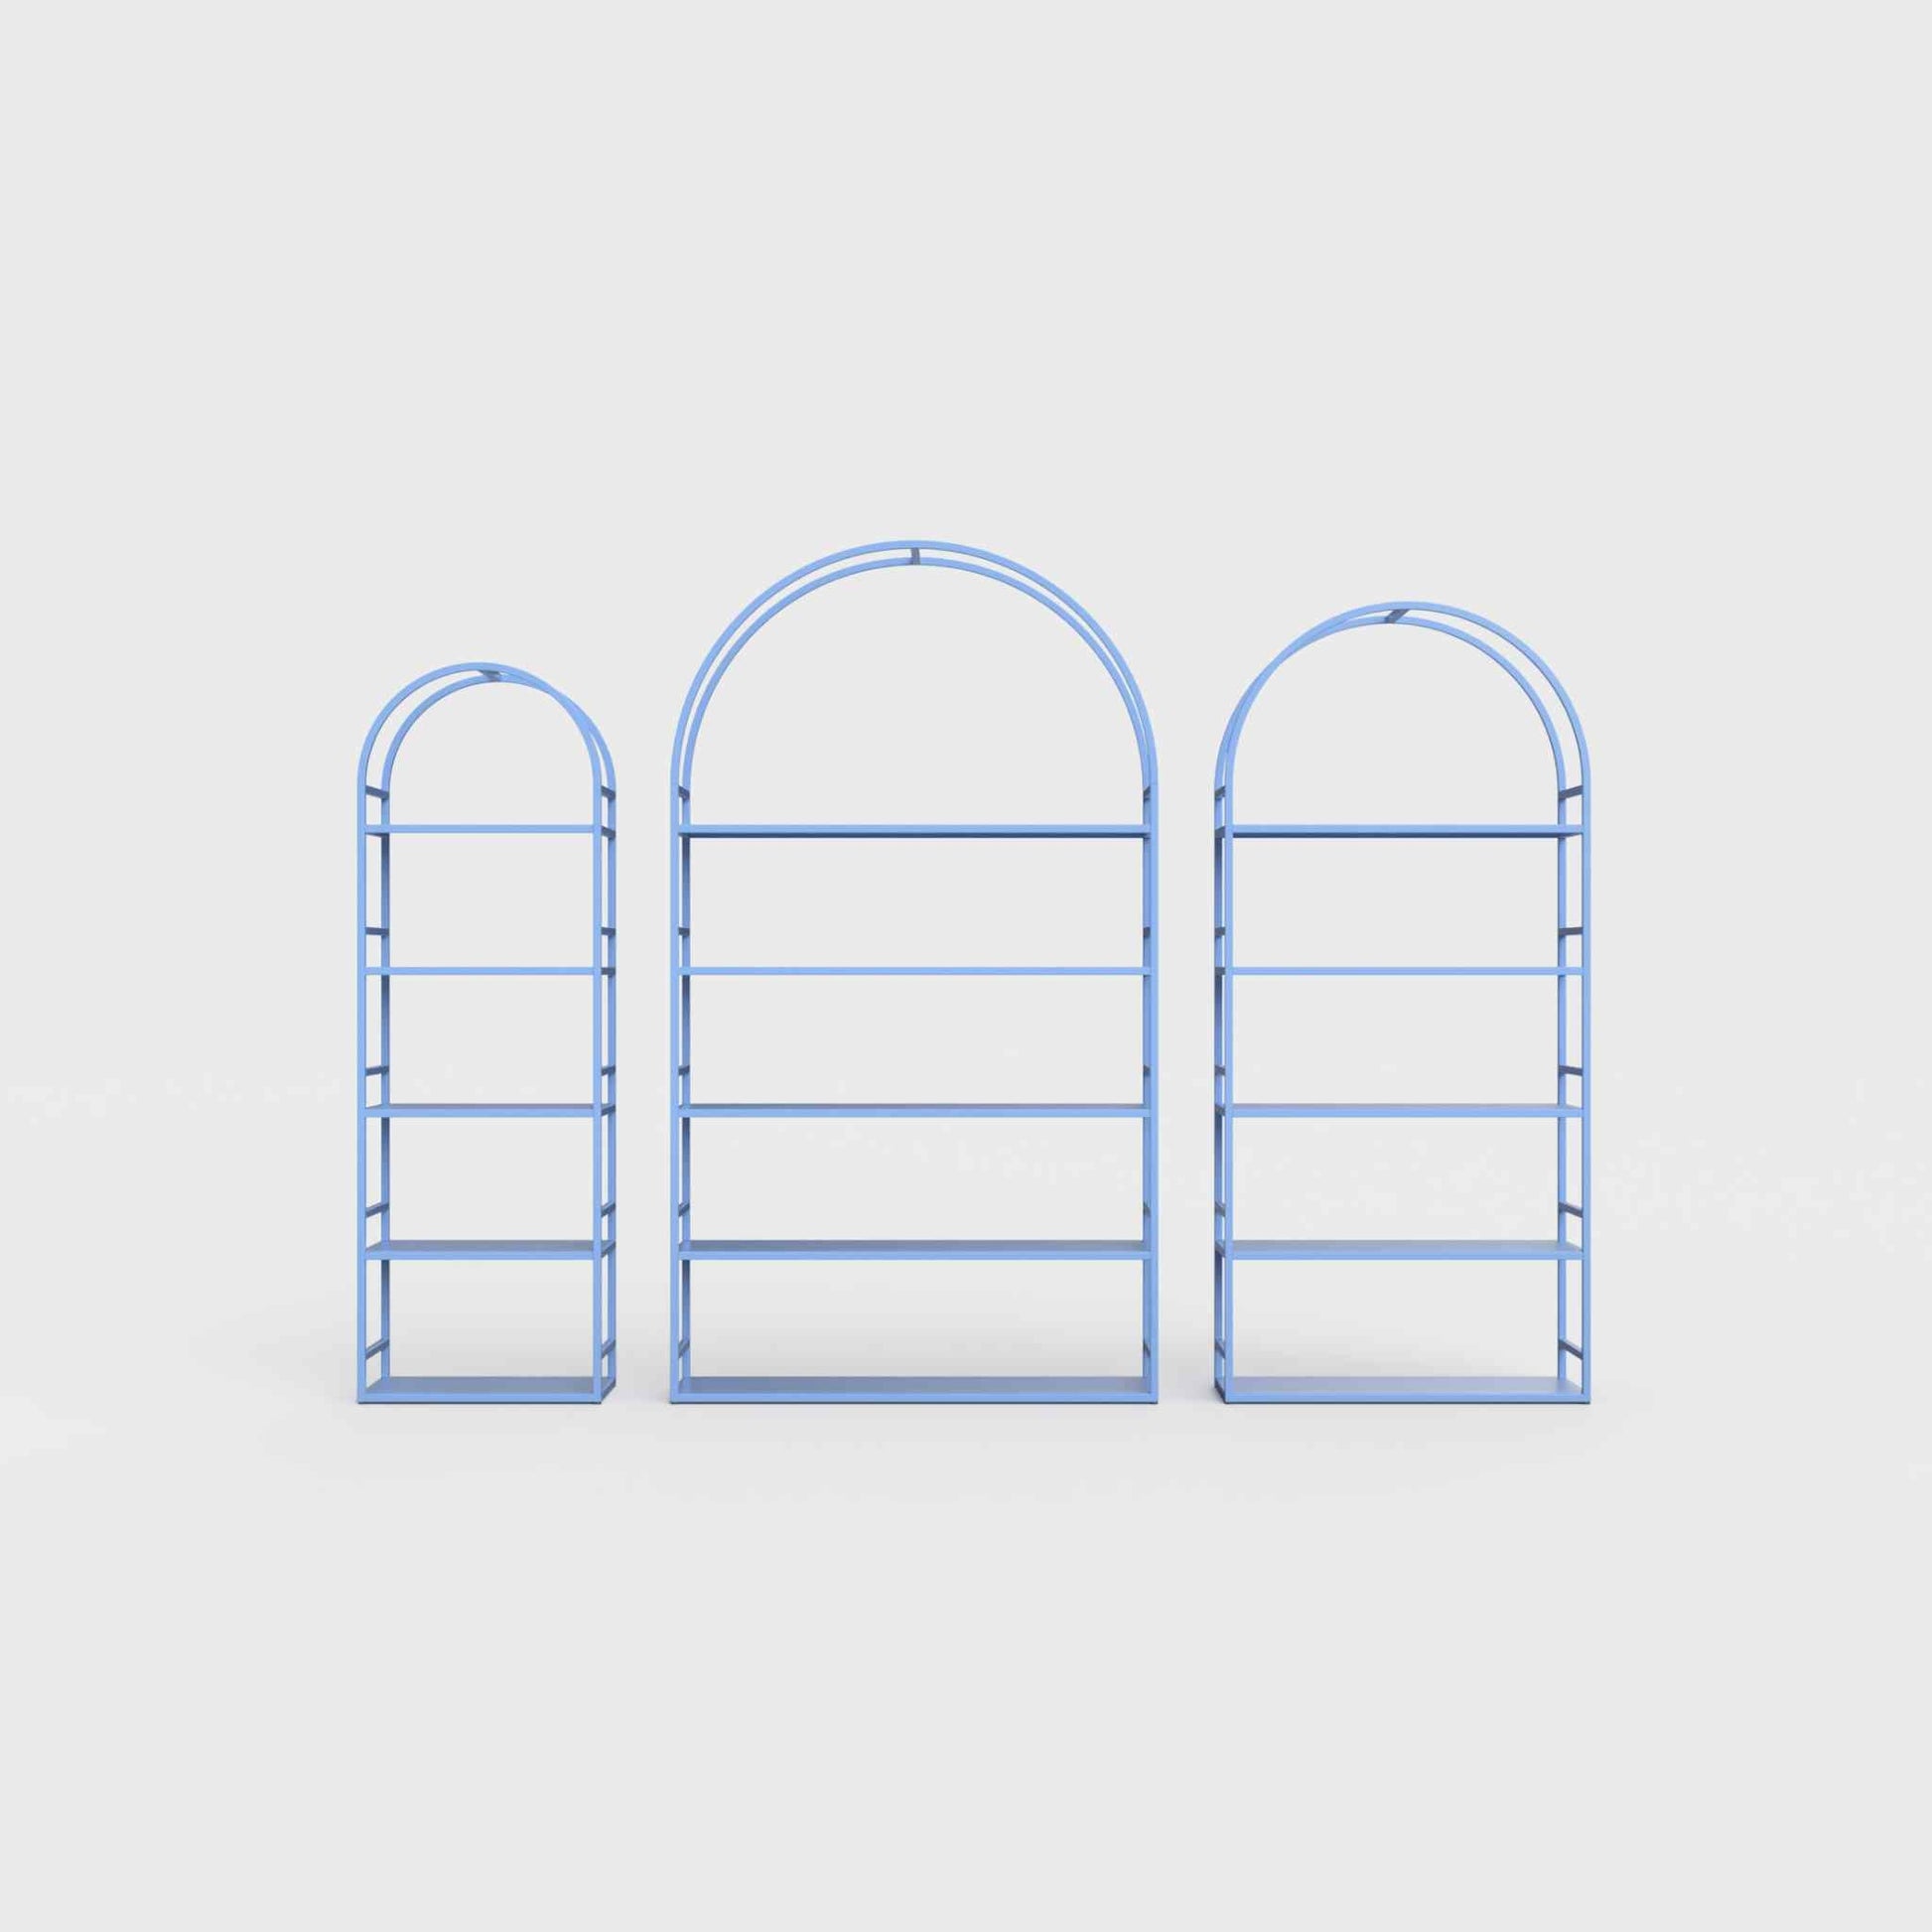 Arched bookcase Arkada, available in Switzerland through ÉTAUDORÉ, made from highest quality powdered coated steel in sky blue color